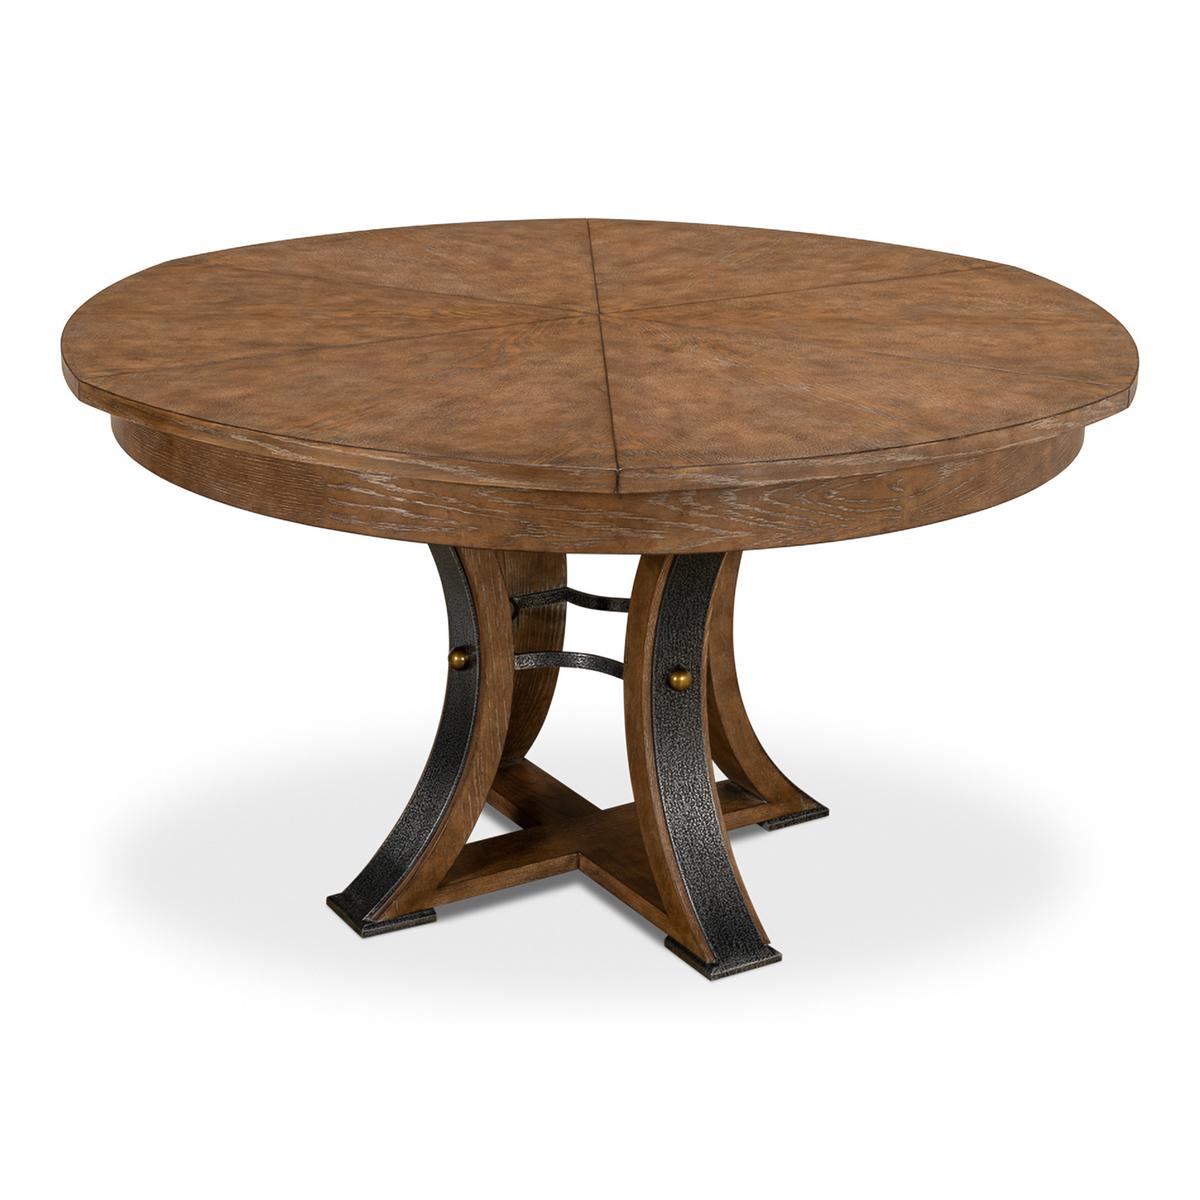 Contemporary Modern Industrial Round Dining Table - 70 - Light Mink For Sale